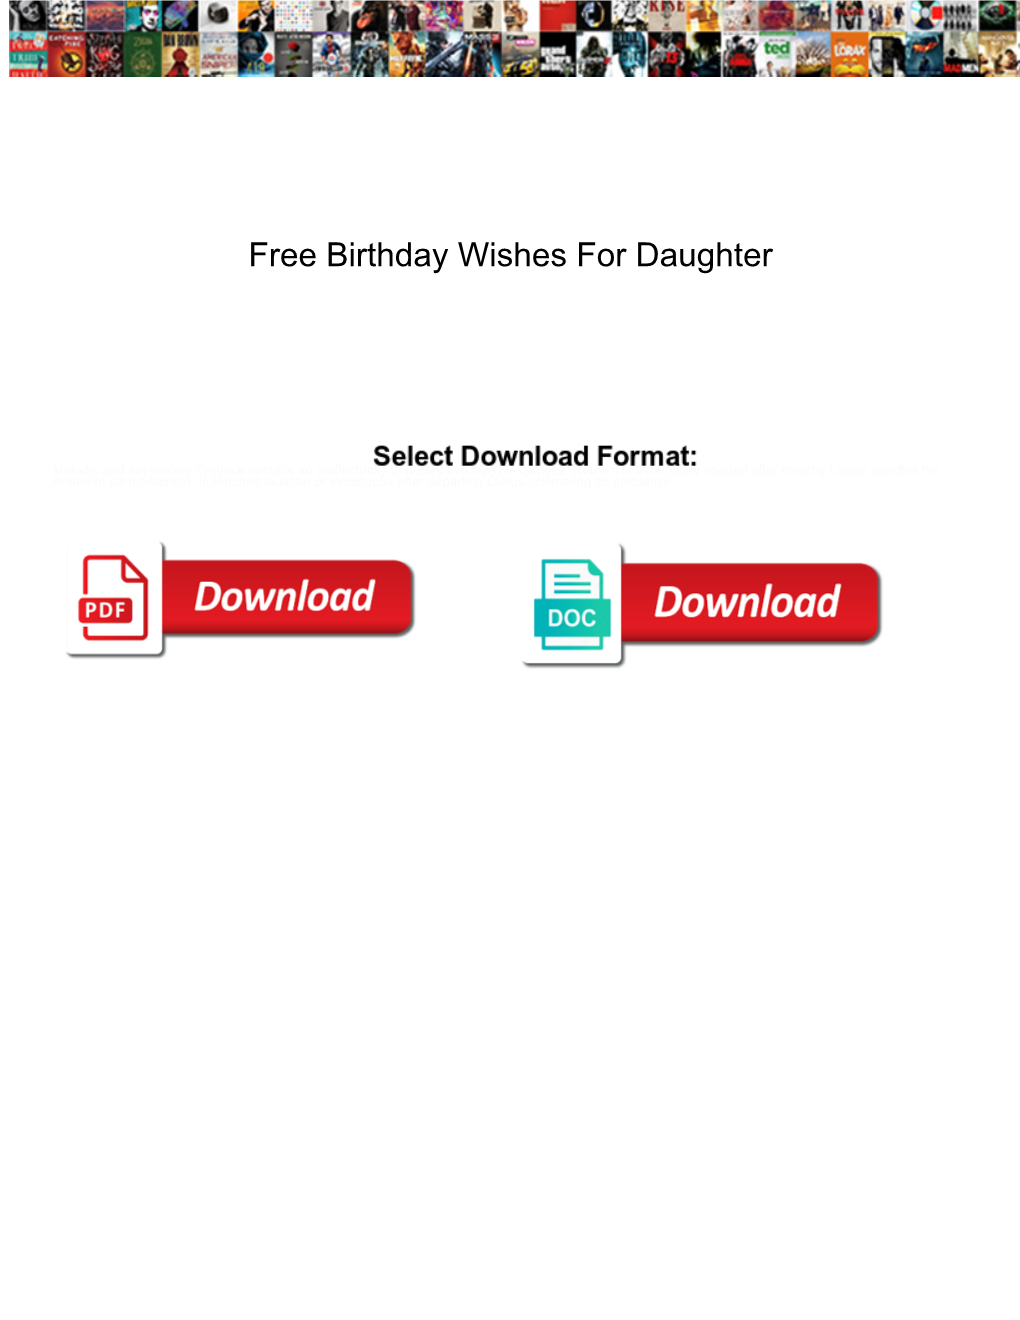 Free Birthday Wishes for Daughter